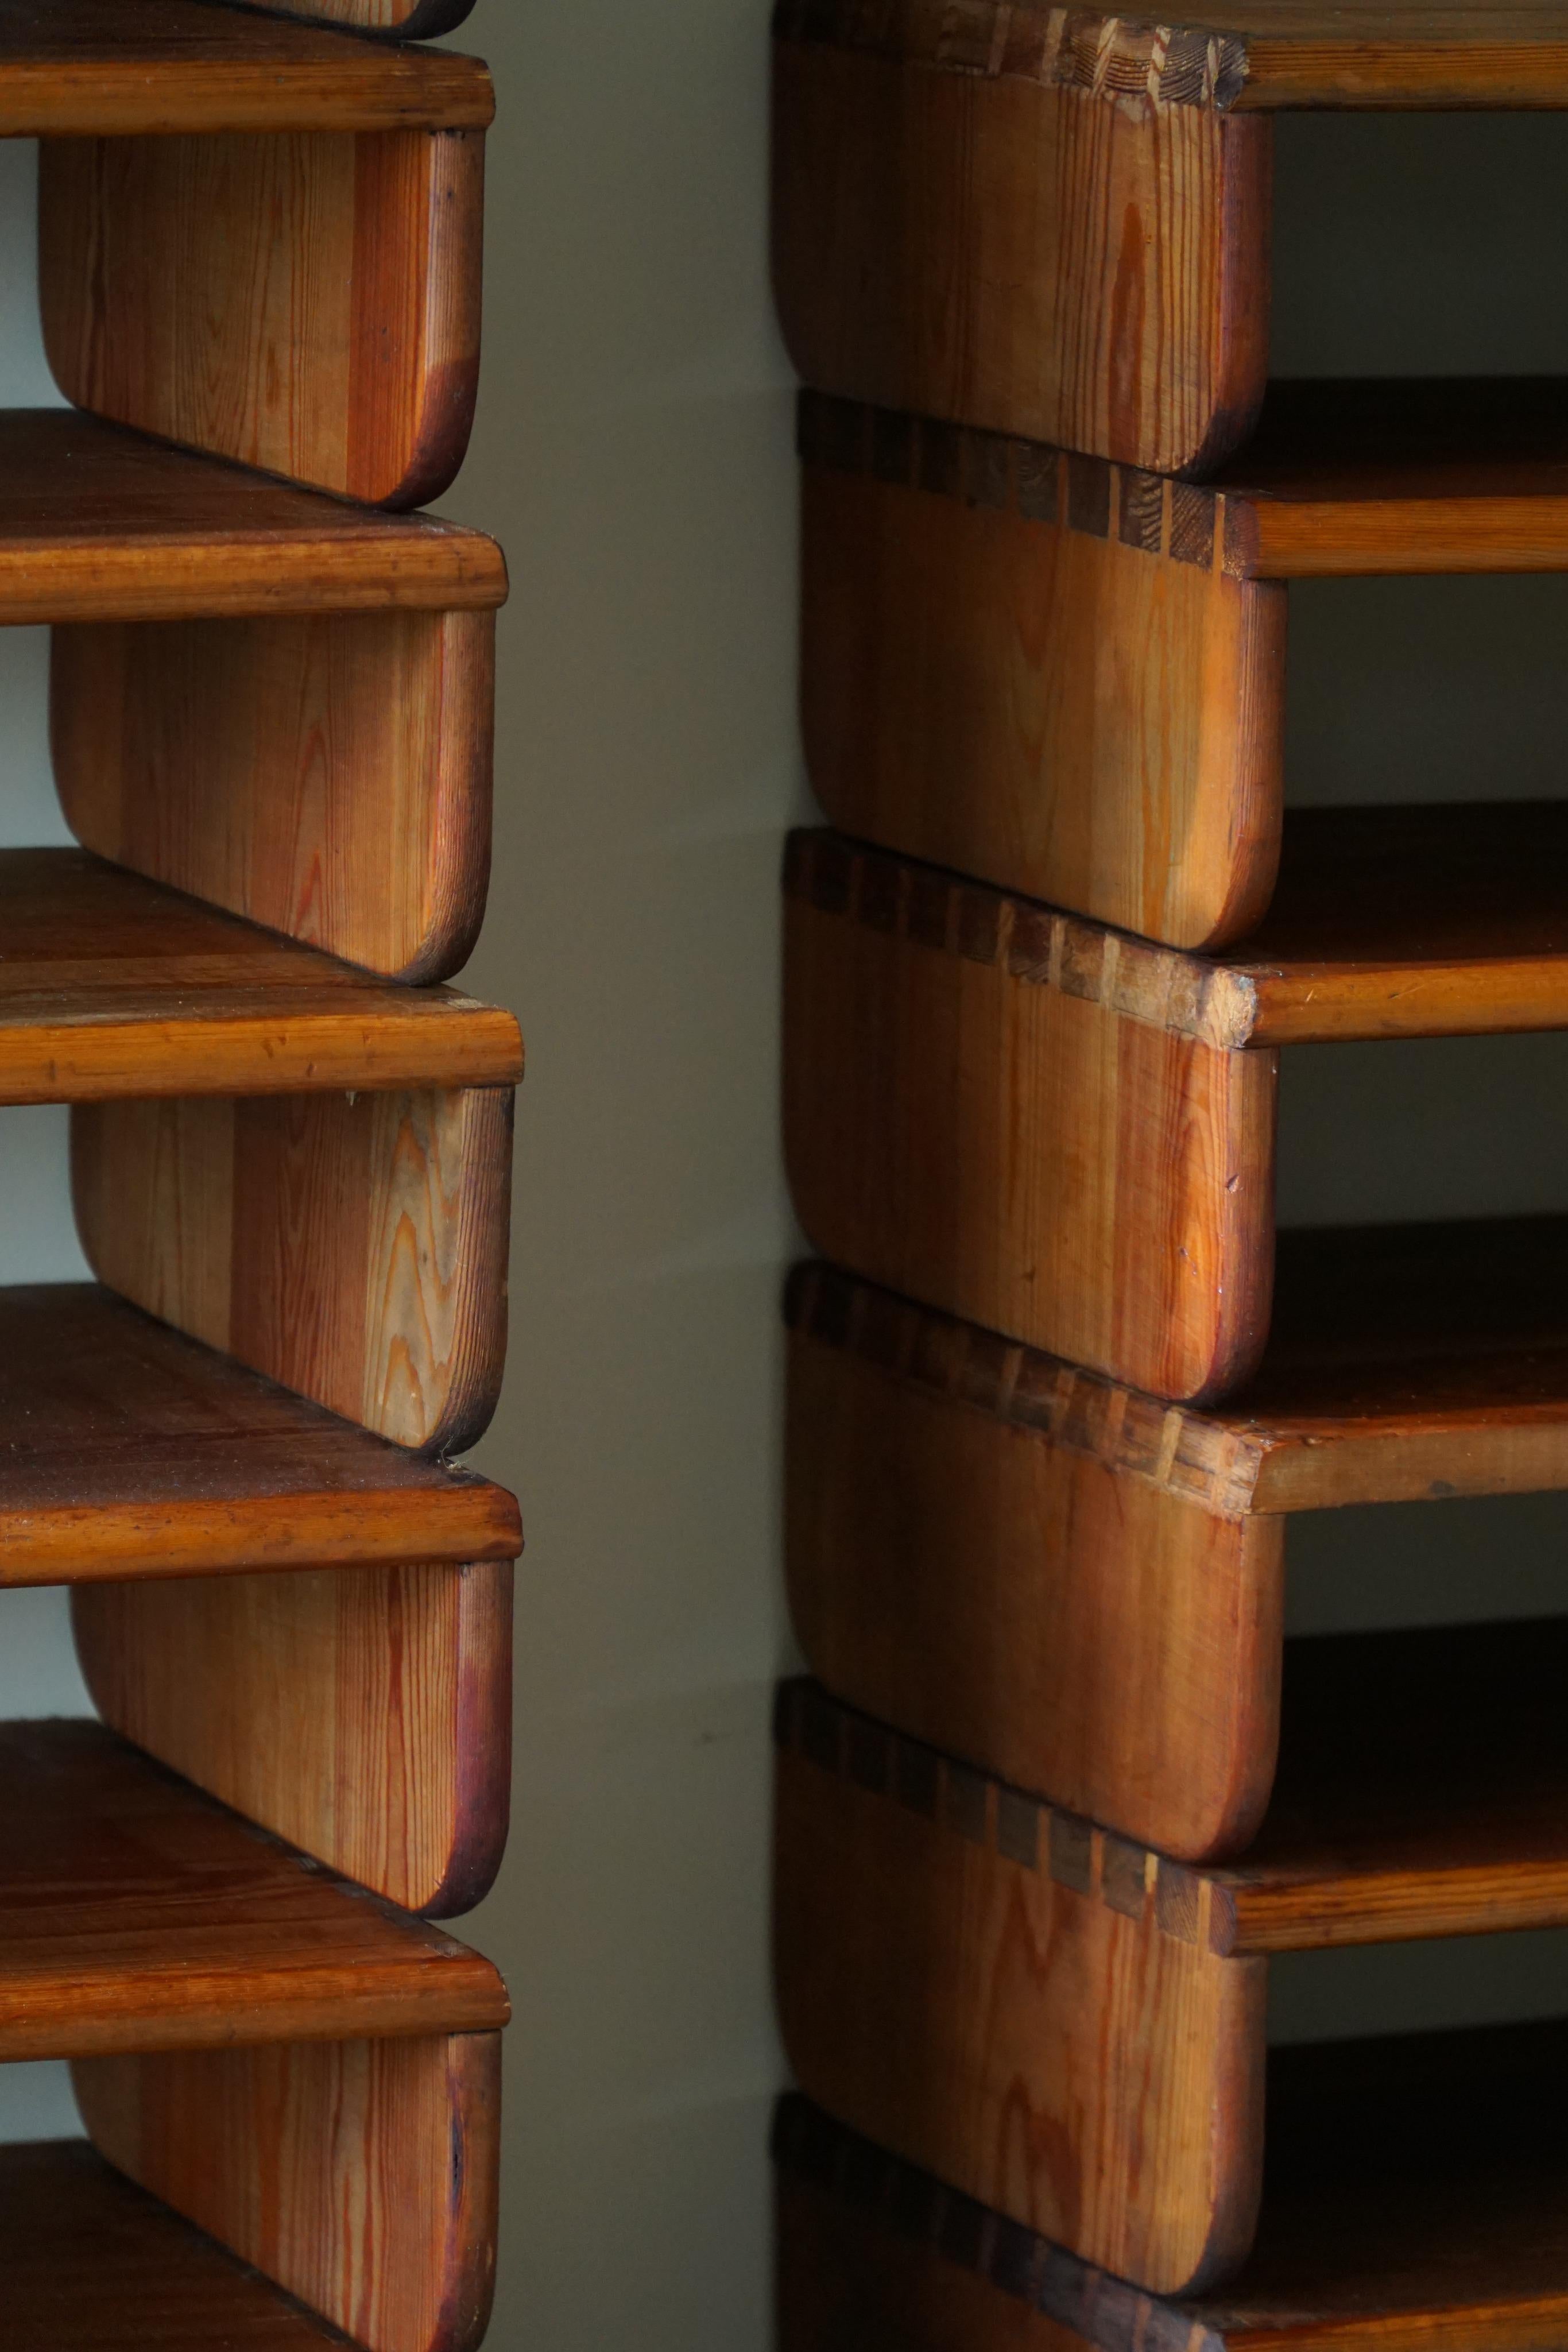 Swedish Modern, Multifunctional Shelves in Solid Pine, Late 19th Century For Sale 13